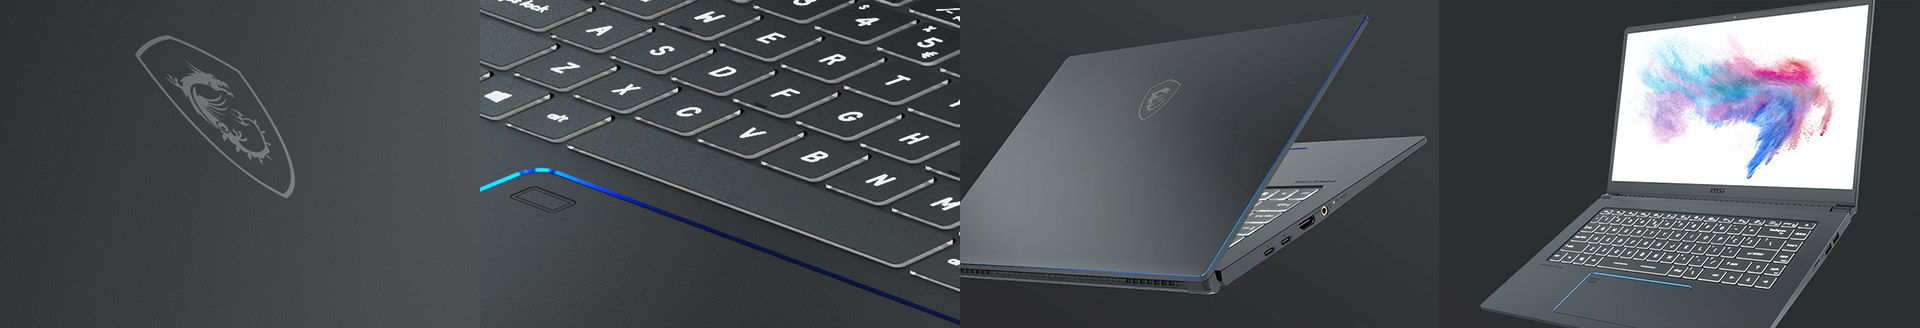 Four Different Views to Show MSI Prestige 15: Front Cover MSI Logo, Keyboard Detail, Side Looking with USB ports and Screen